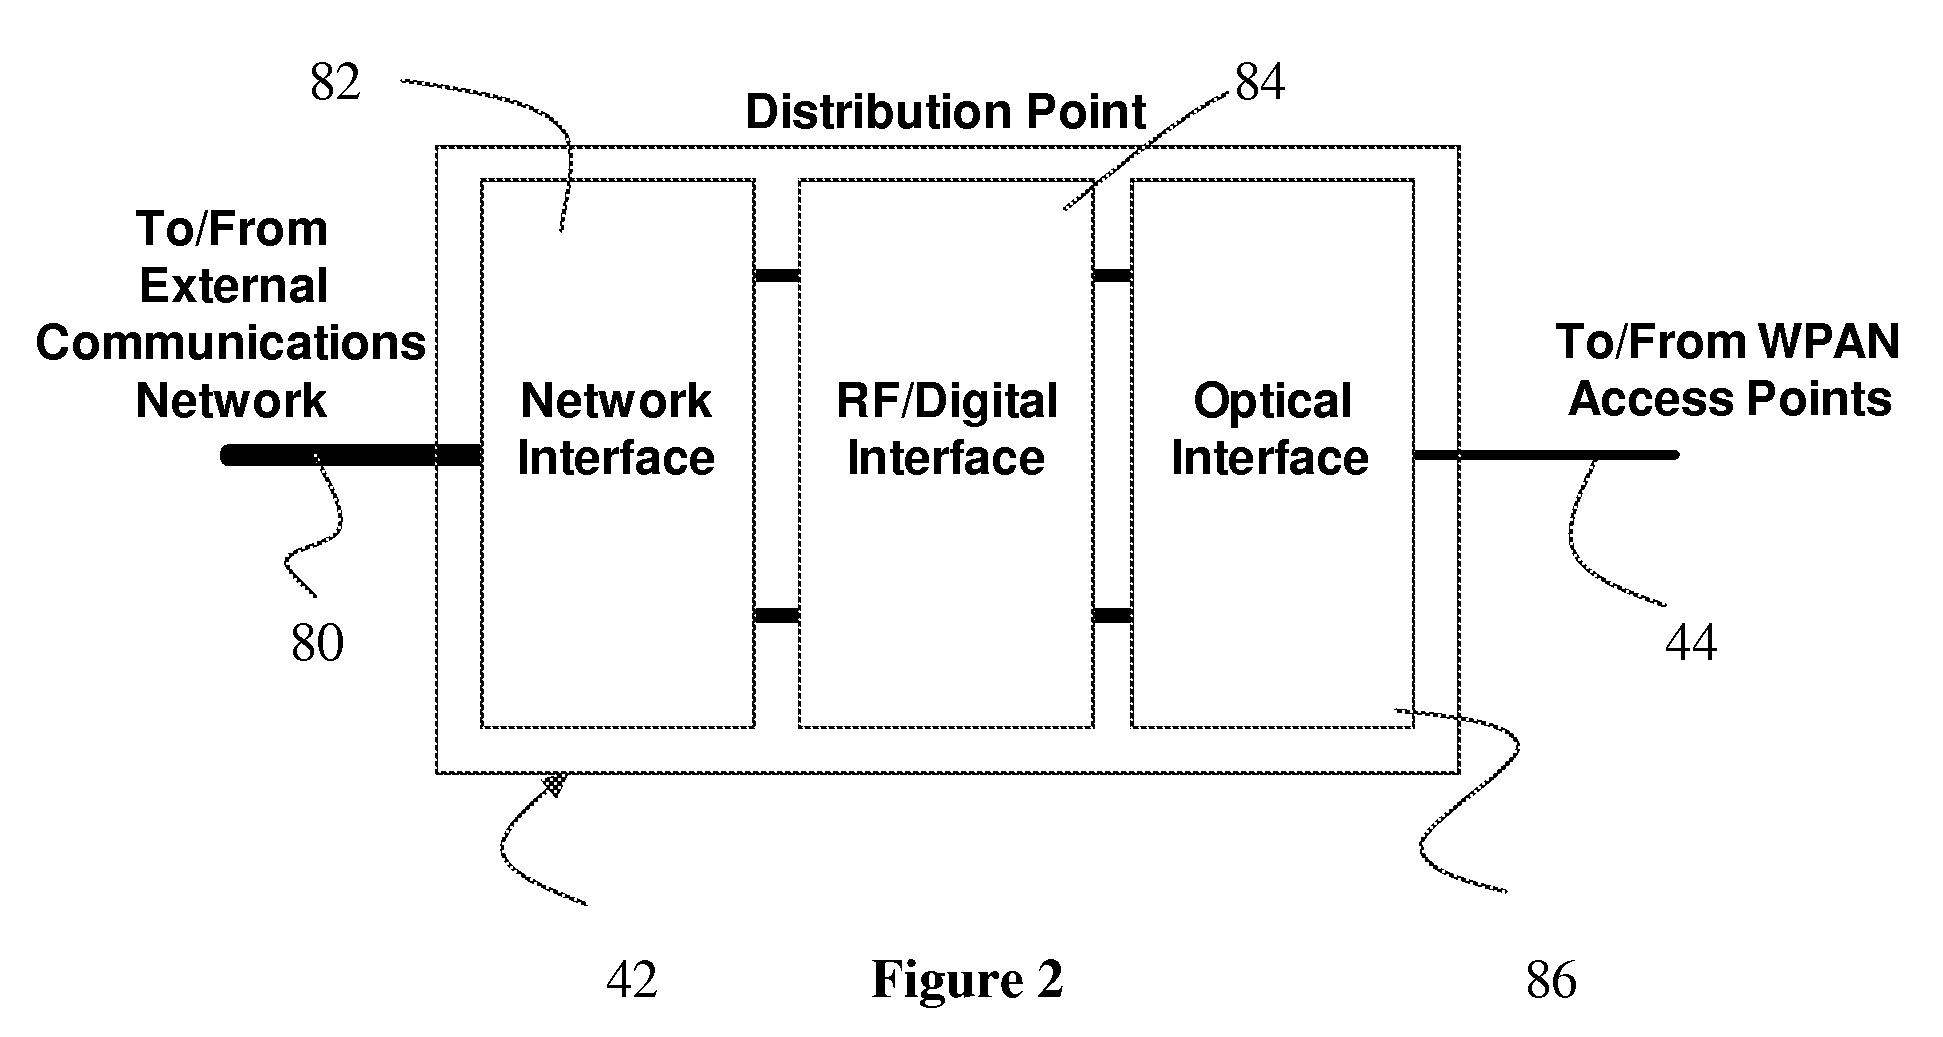 Optical fiber distributed wireless personal area network